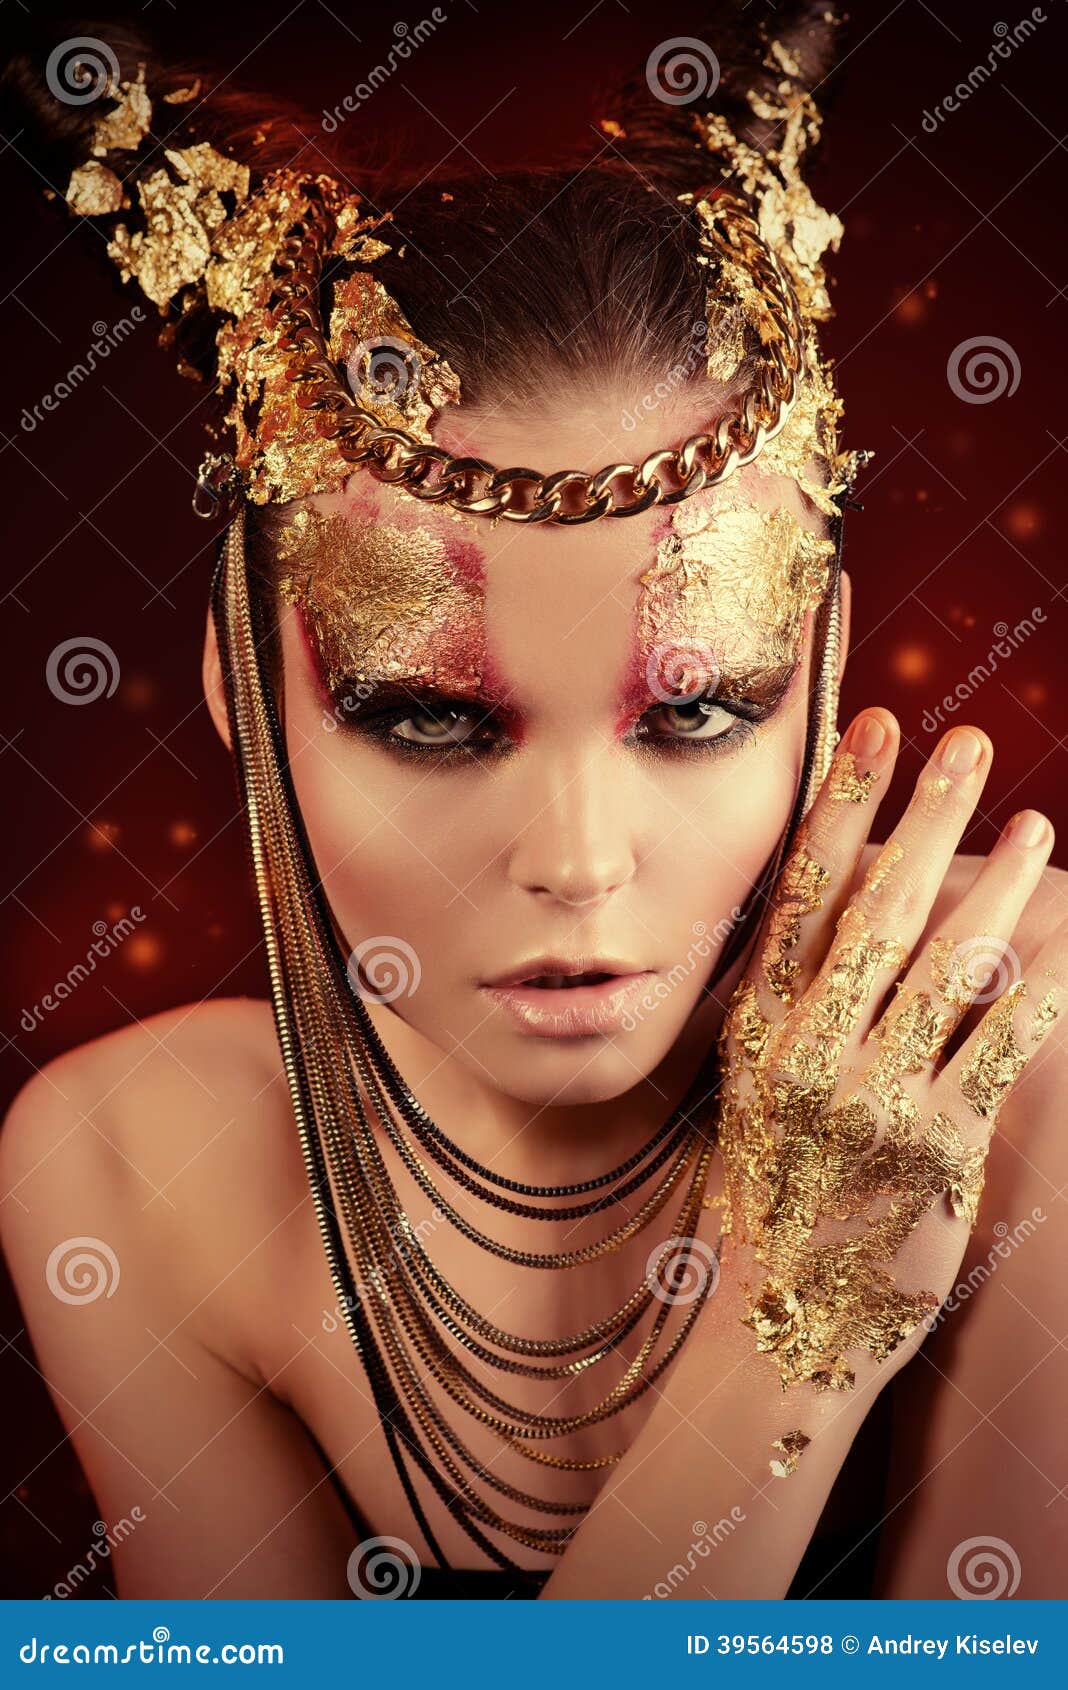 Attractive woman stock photo. Image of gold, chic, concept - 39564598